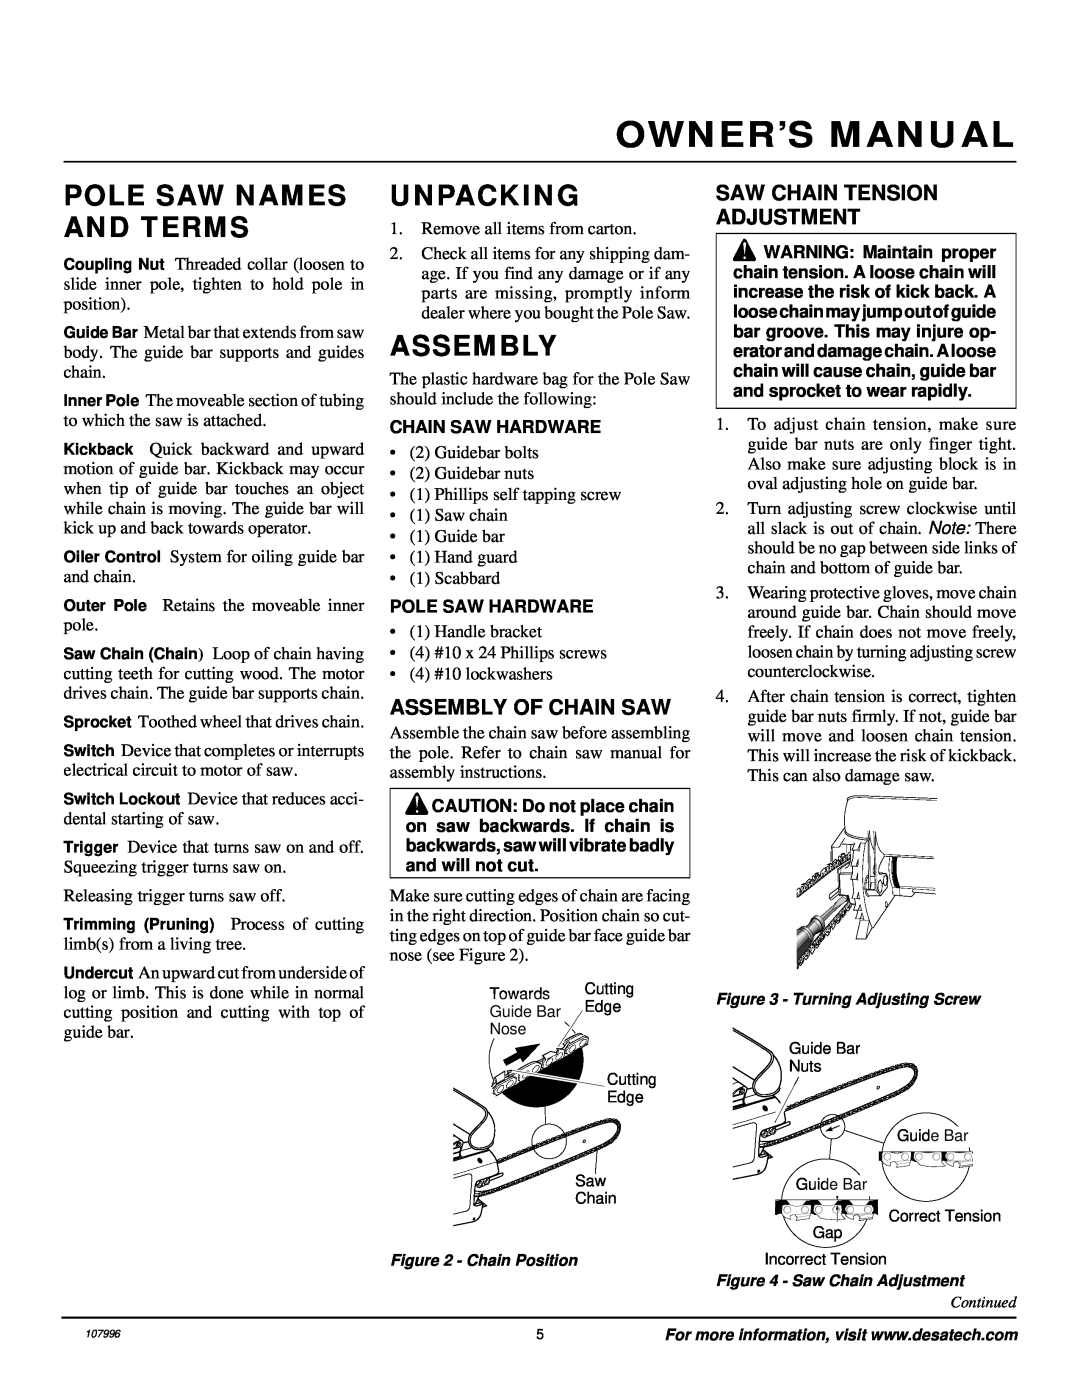 Desa RPS 96 Pole Saw Names And Terms, Unpacking, Assembly Of Chain Saw, Saw Chain Tension Adjustment, Owner’S Manual 